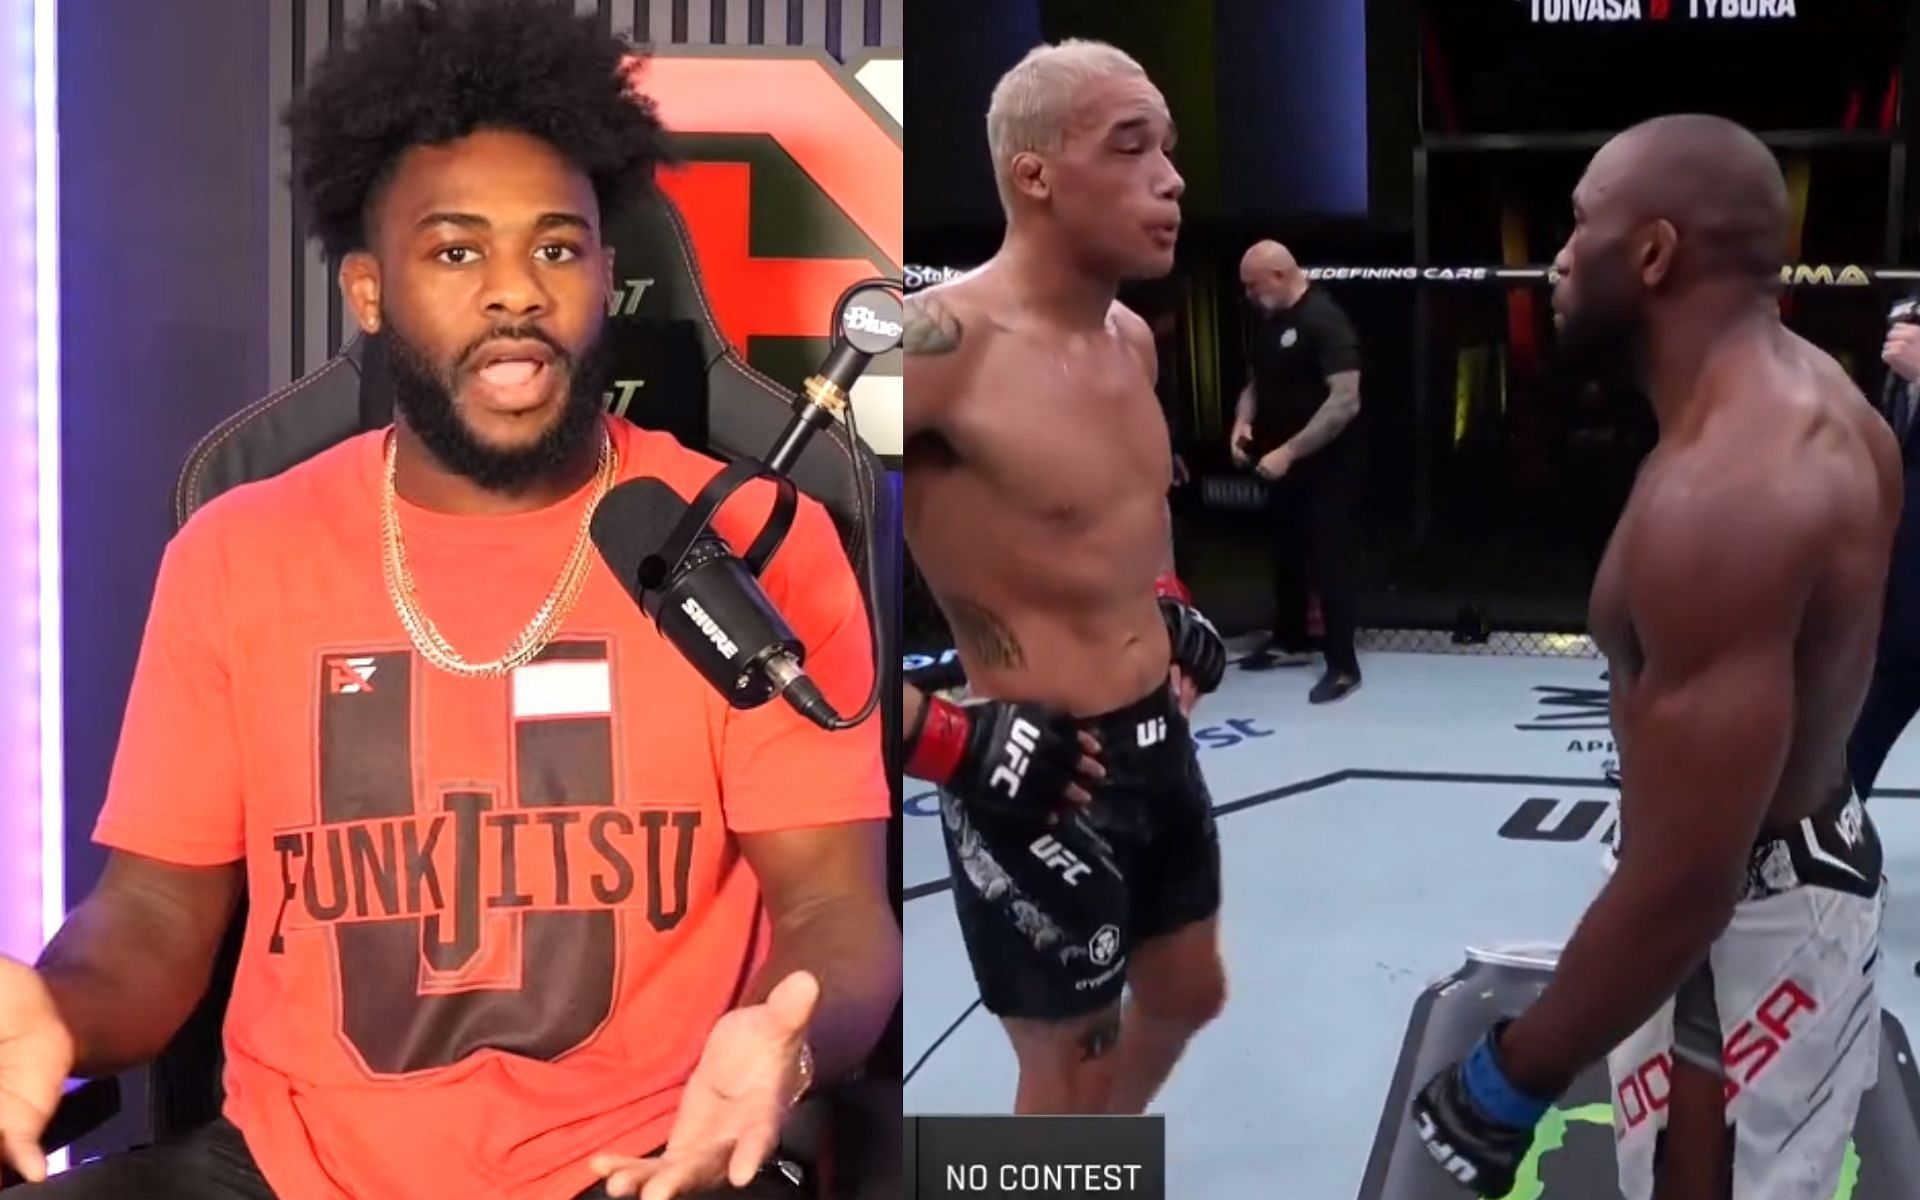 Aljamain Sterling (left) weighs in on eye-poke controversy between Bryan Battle and Ange Loosa (right) [Images Courtesy: @funkmastermma on YouTube, @ufceurope on X]